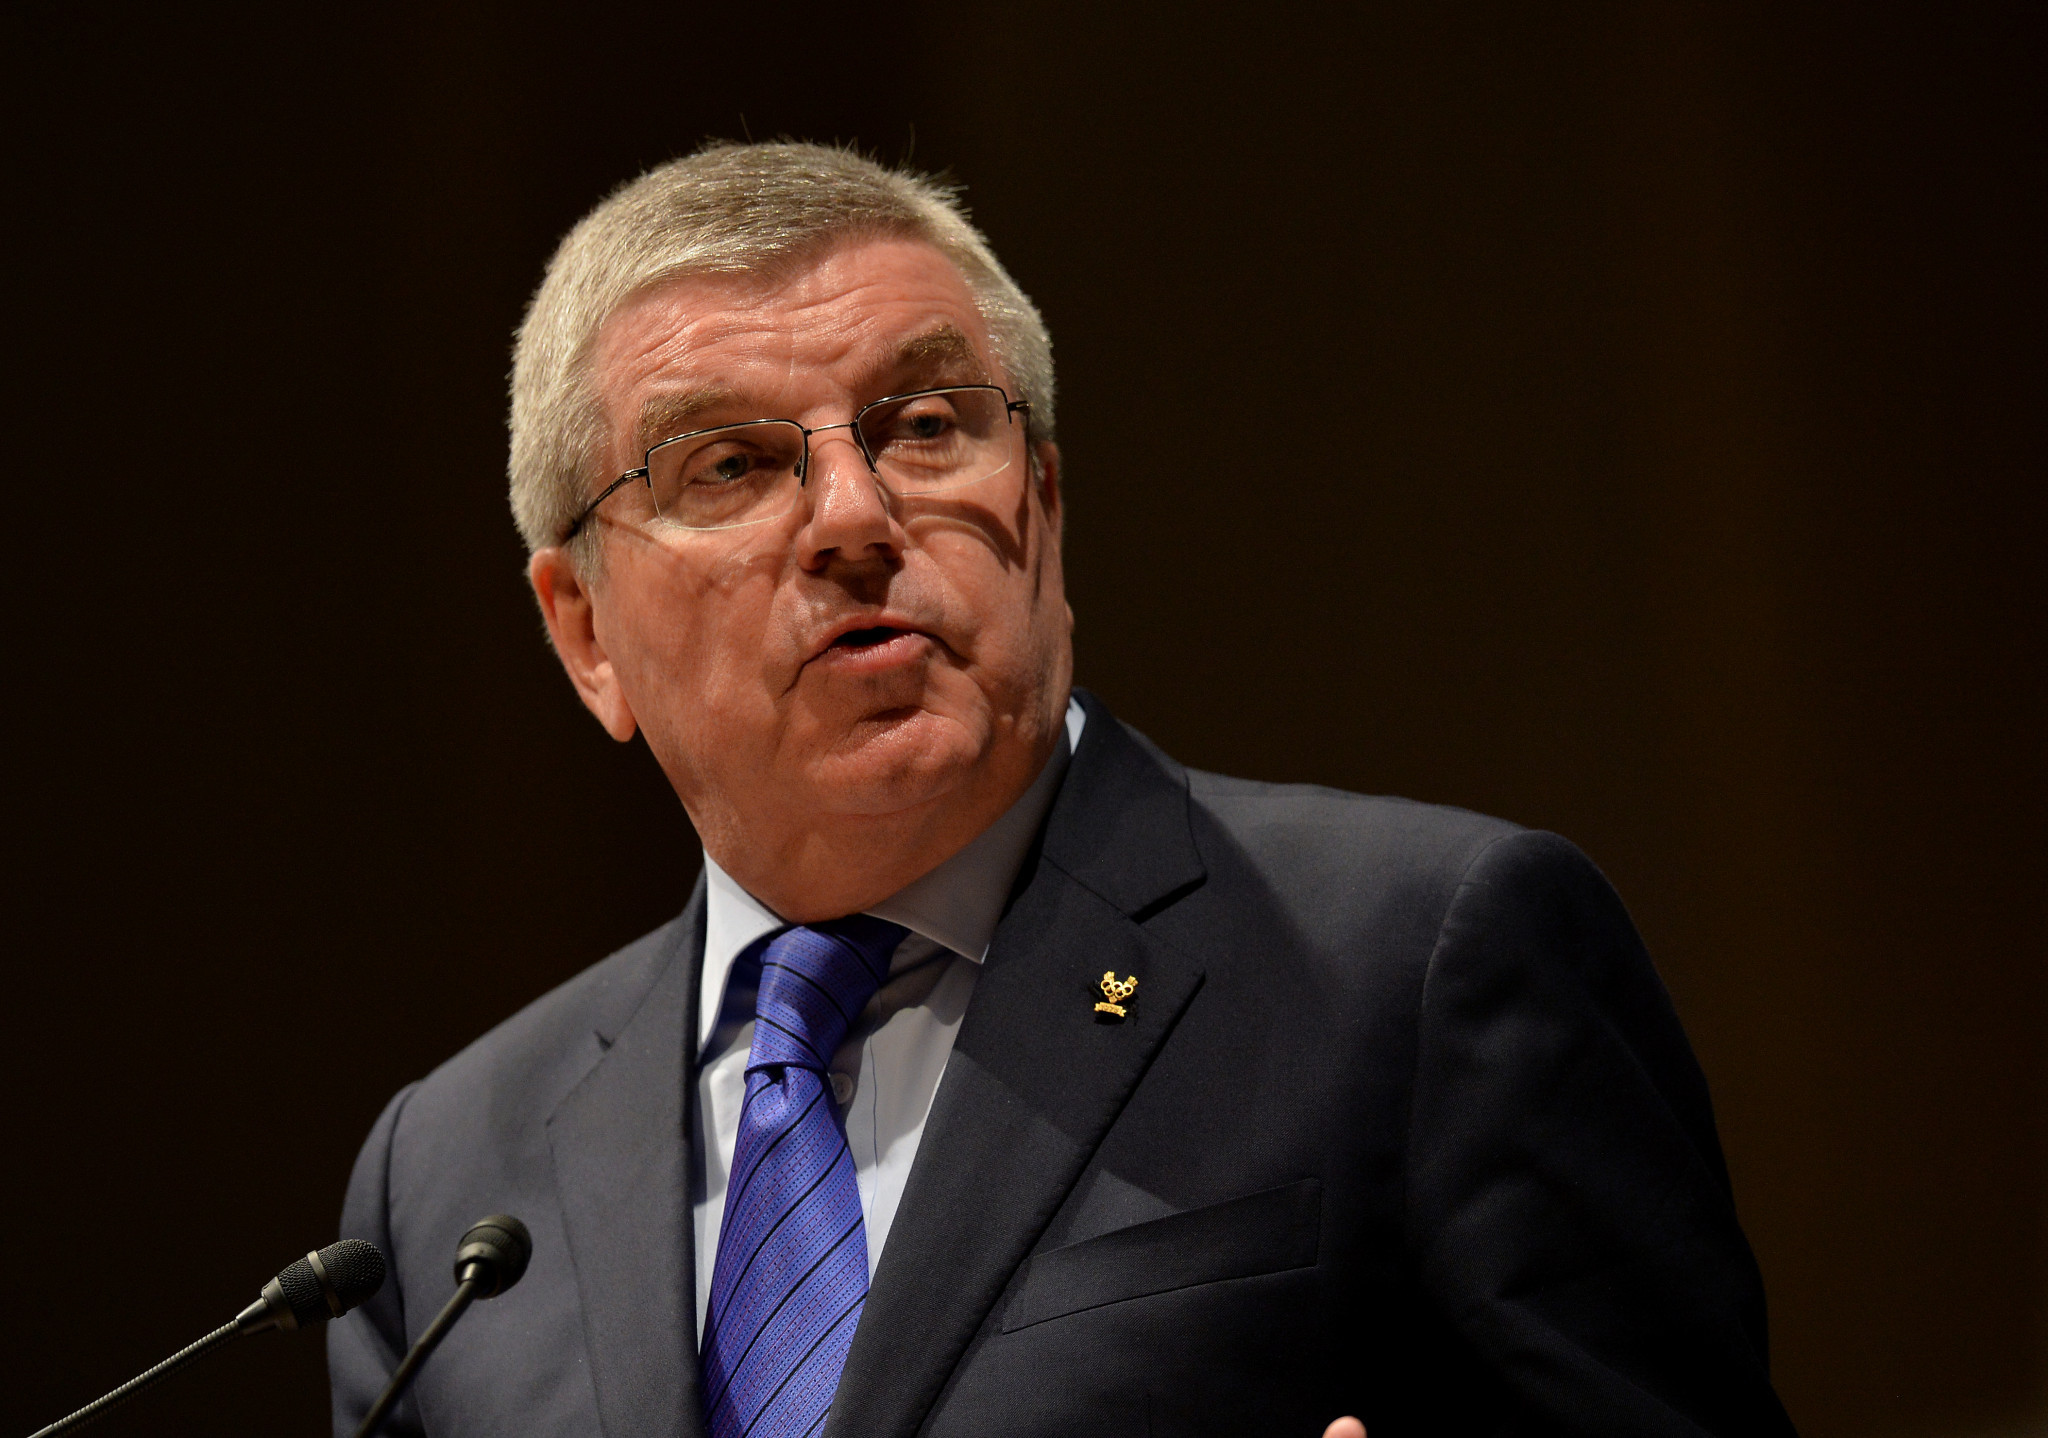 IOC President Thomas Bach will preside over the two-day Executive Board meeting in Tokyo ©Getty Images